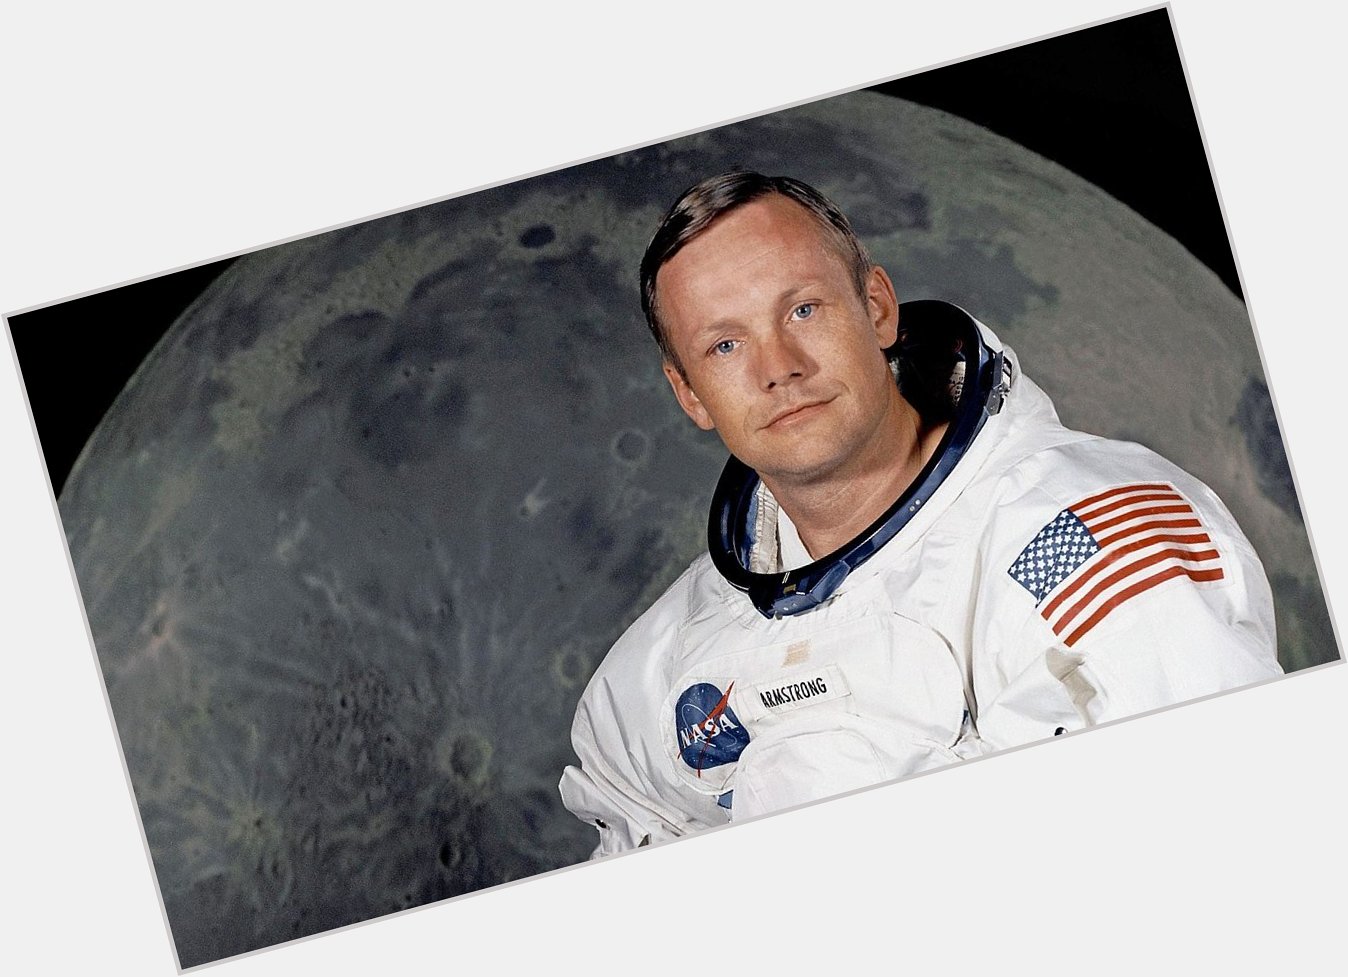 A very special Happy Birthday to the first man to step on the moon, Neil Armstrong! Credit: 